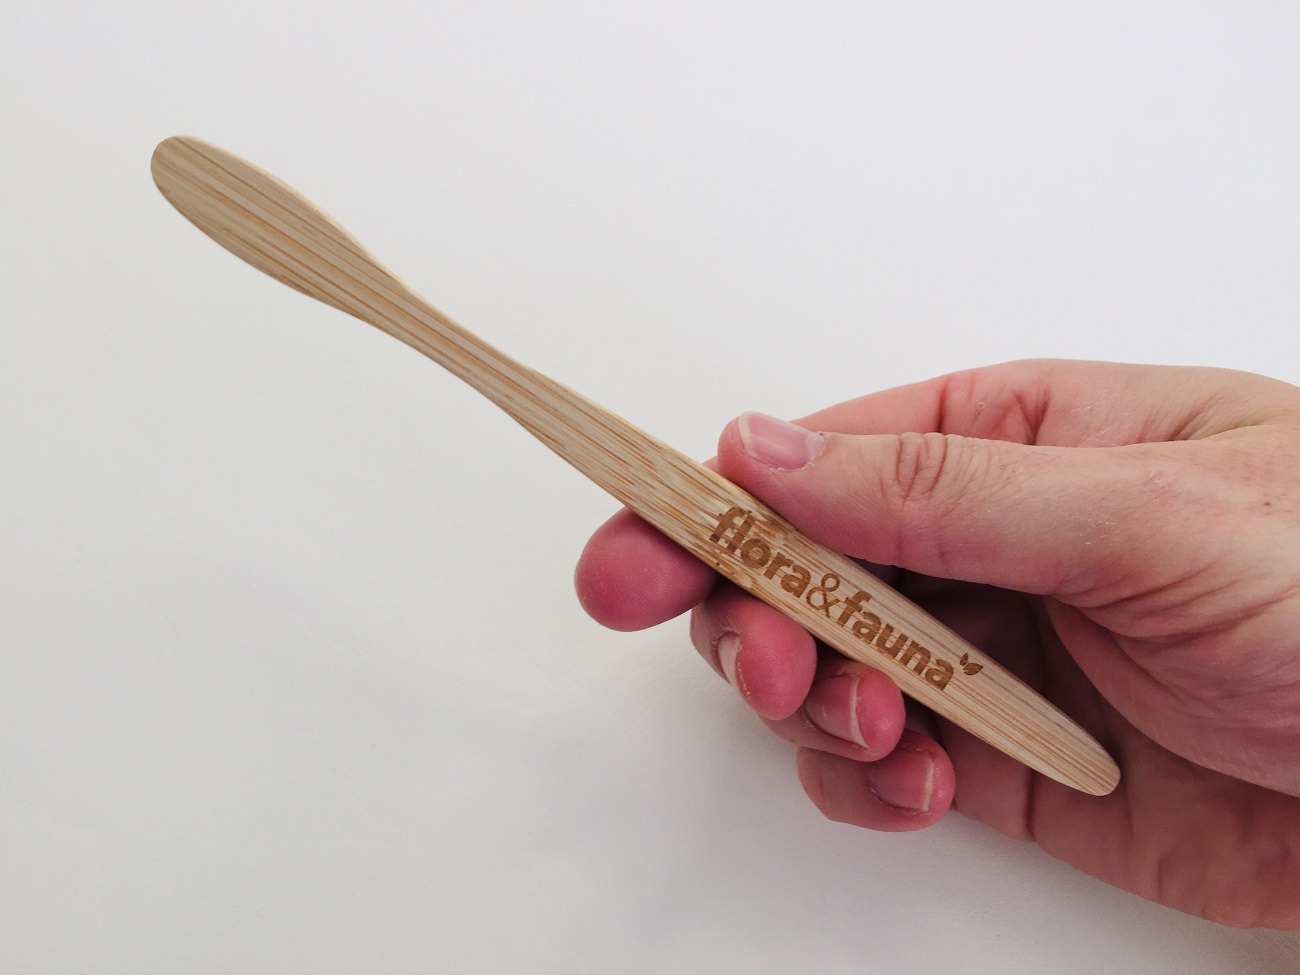 Holding the Flora & Fauna Bamboo toothbrush